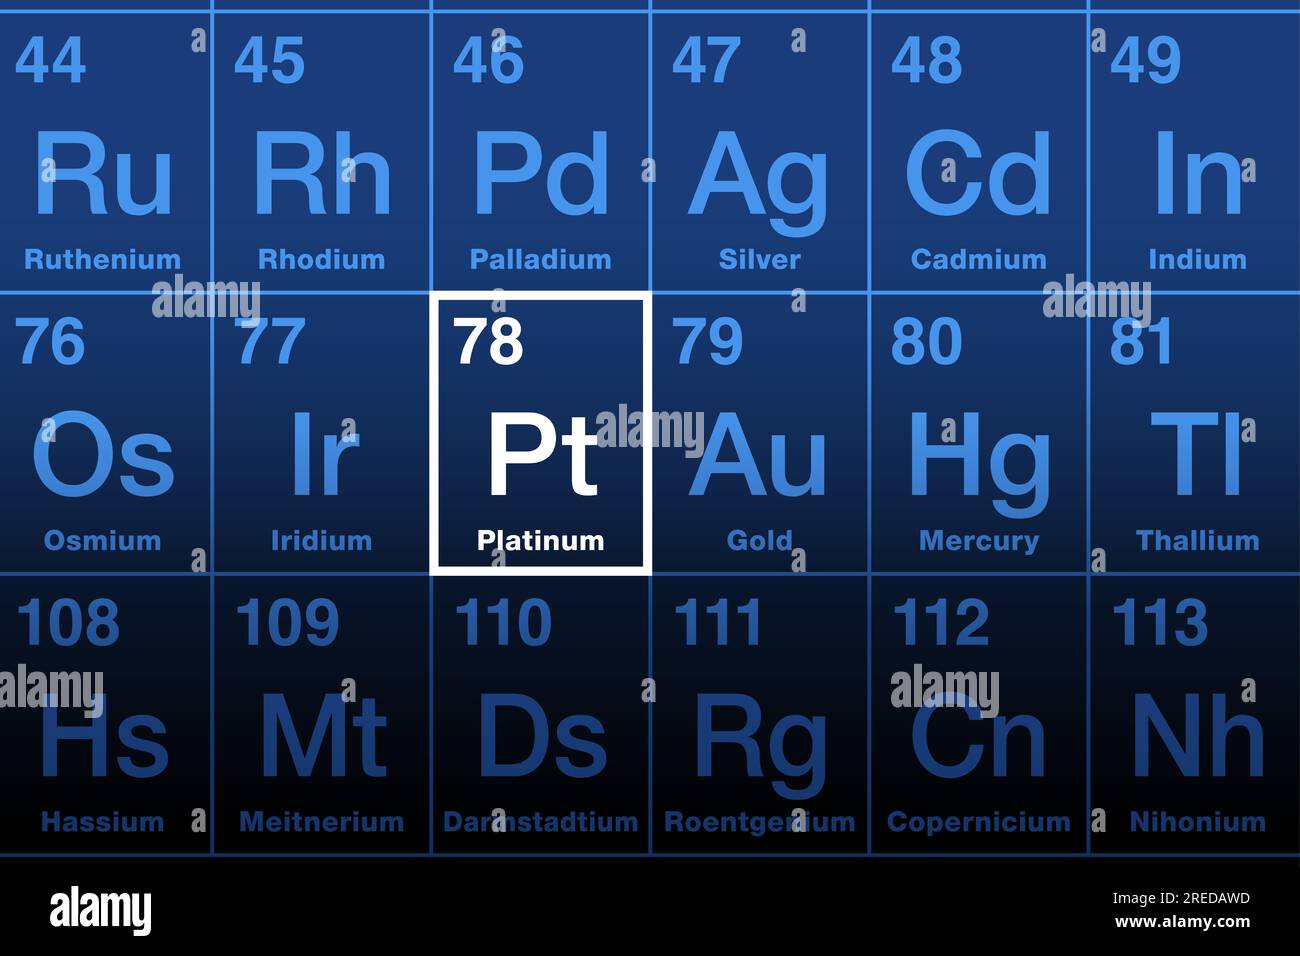 Platinum element on the periodic table. Precious, heavy metal with chemical symbol Pt (Spanish plata for Silver), and with atomic number 78. Stock Photo